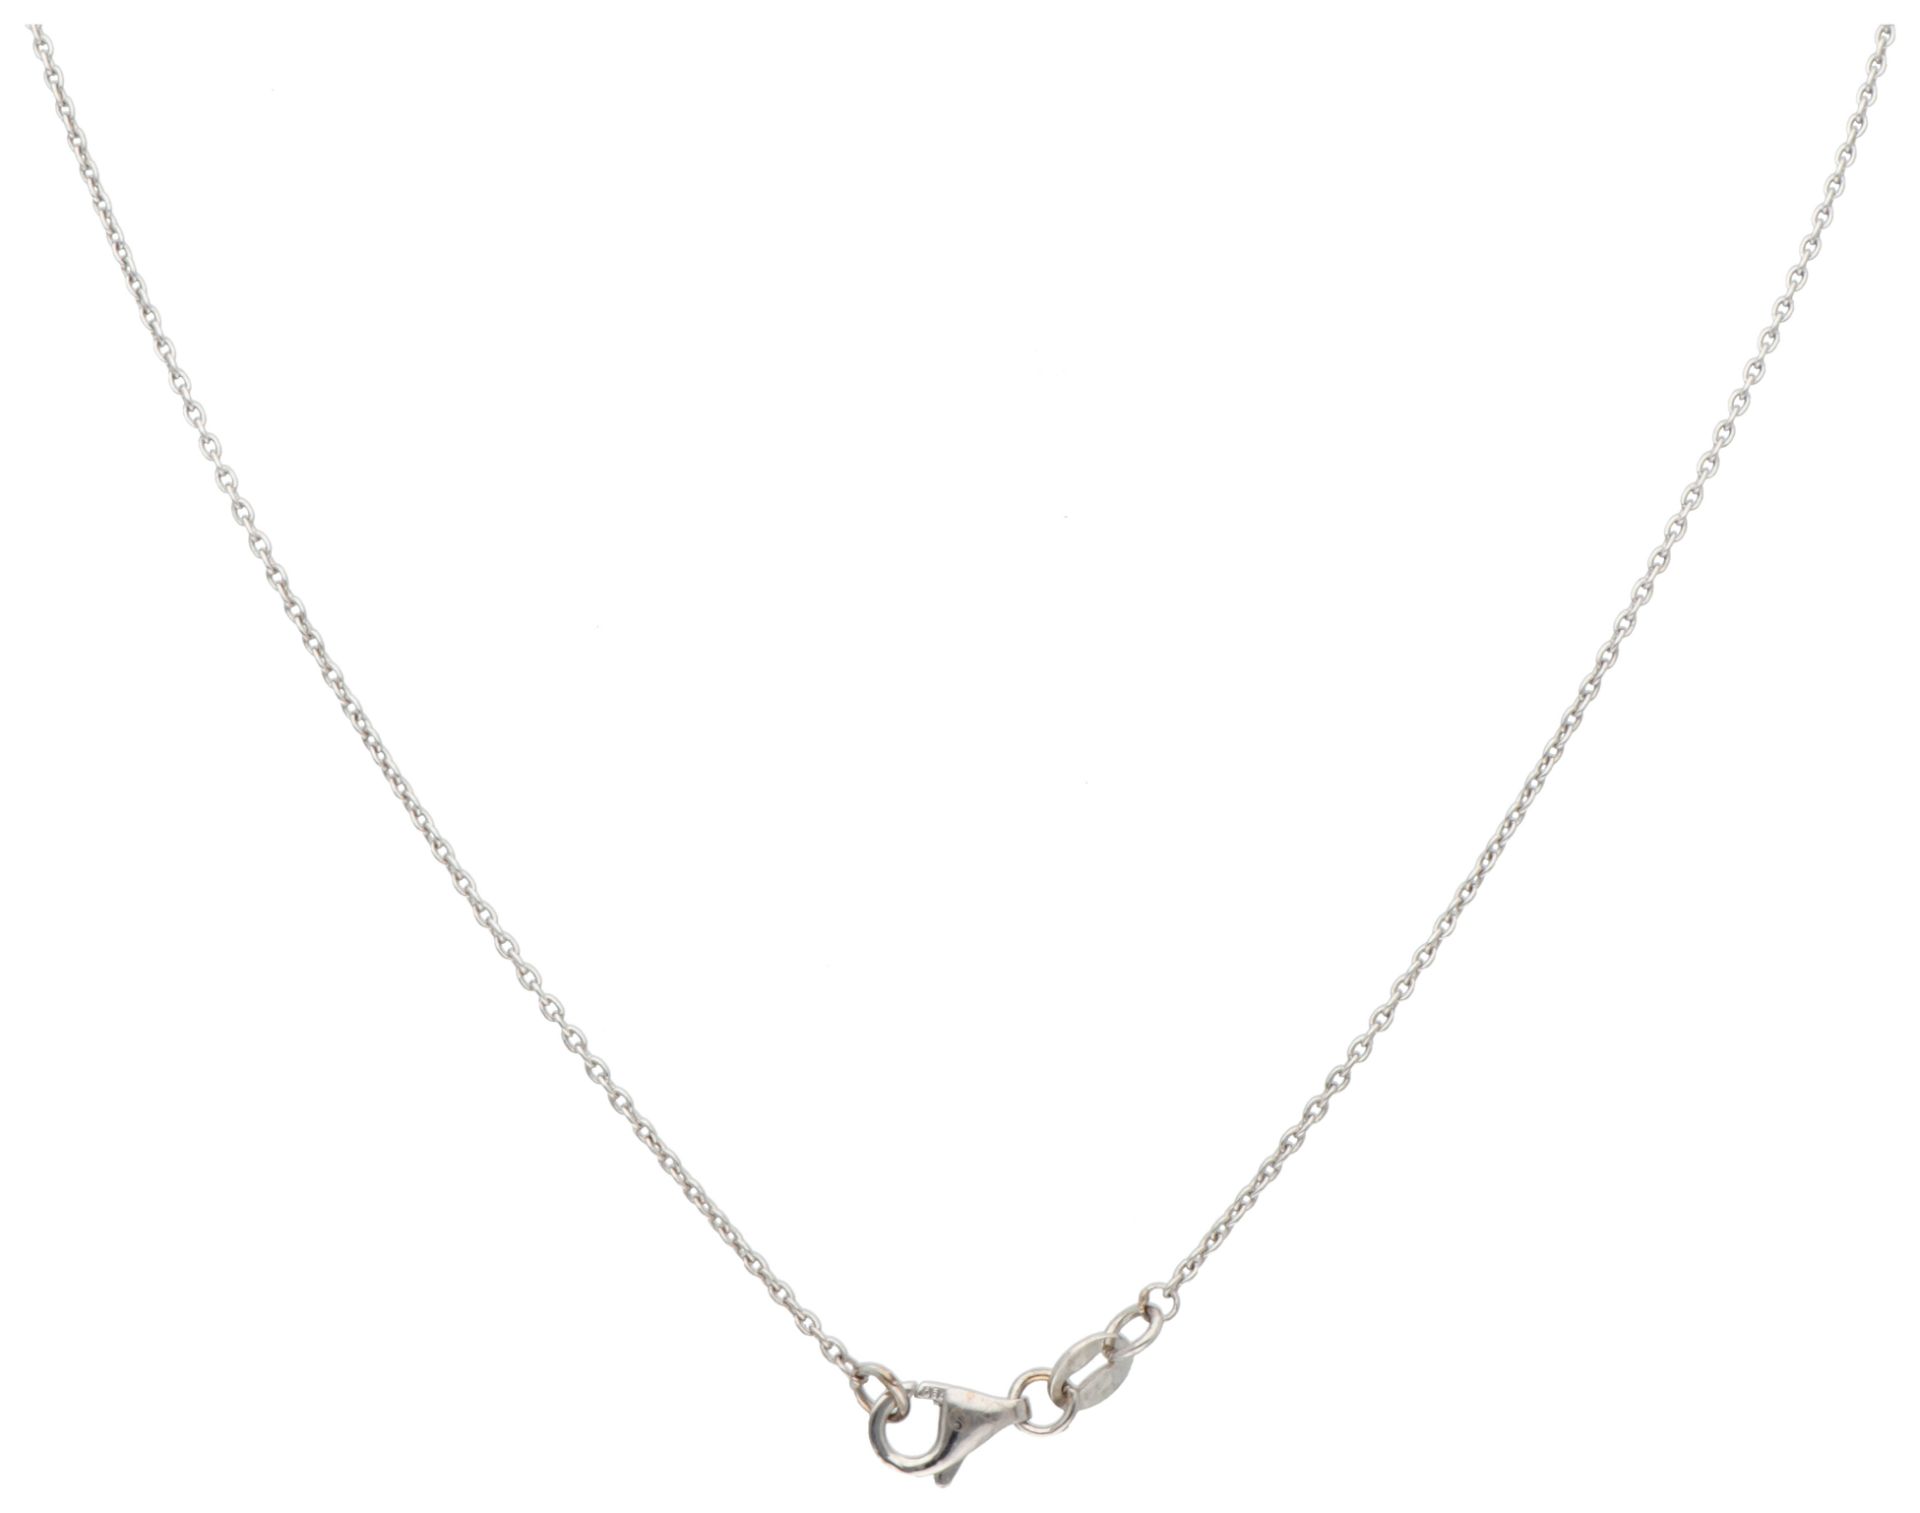 18K White gold necklace with halo pendant set with moissanite and simili. - Image 3 of 3